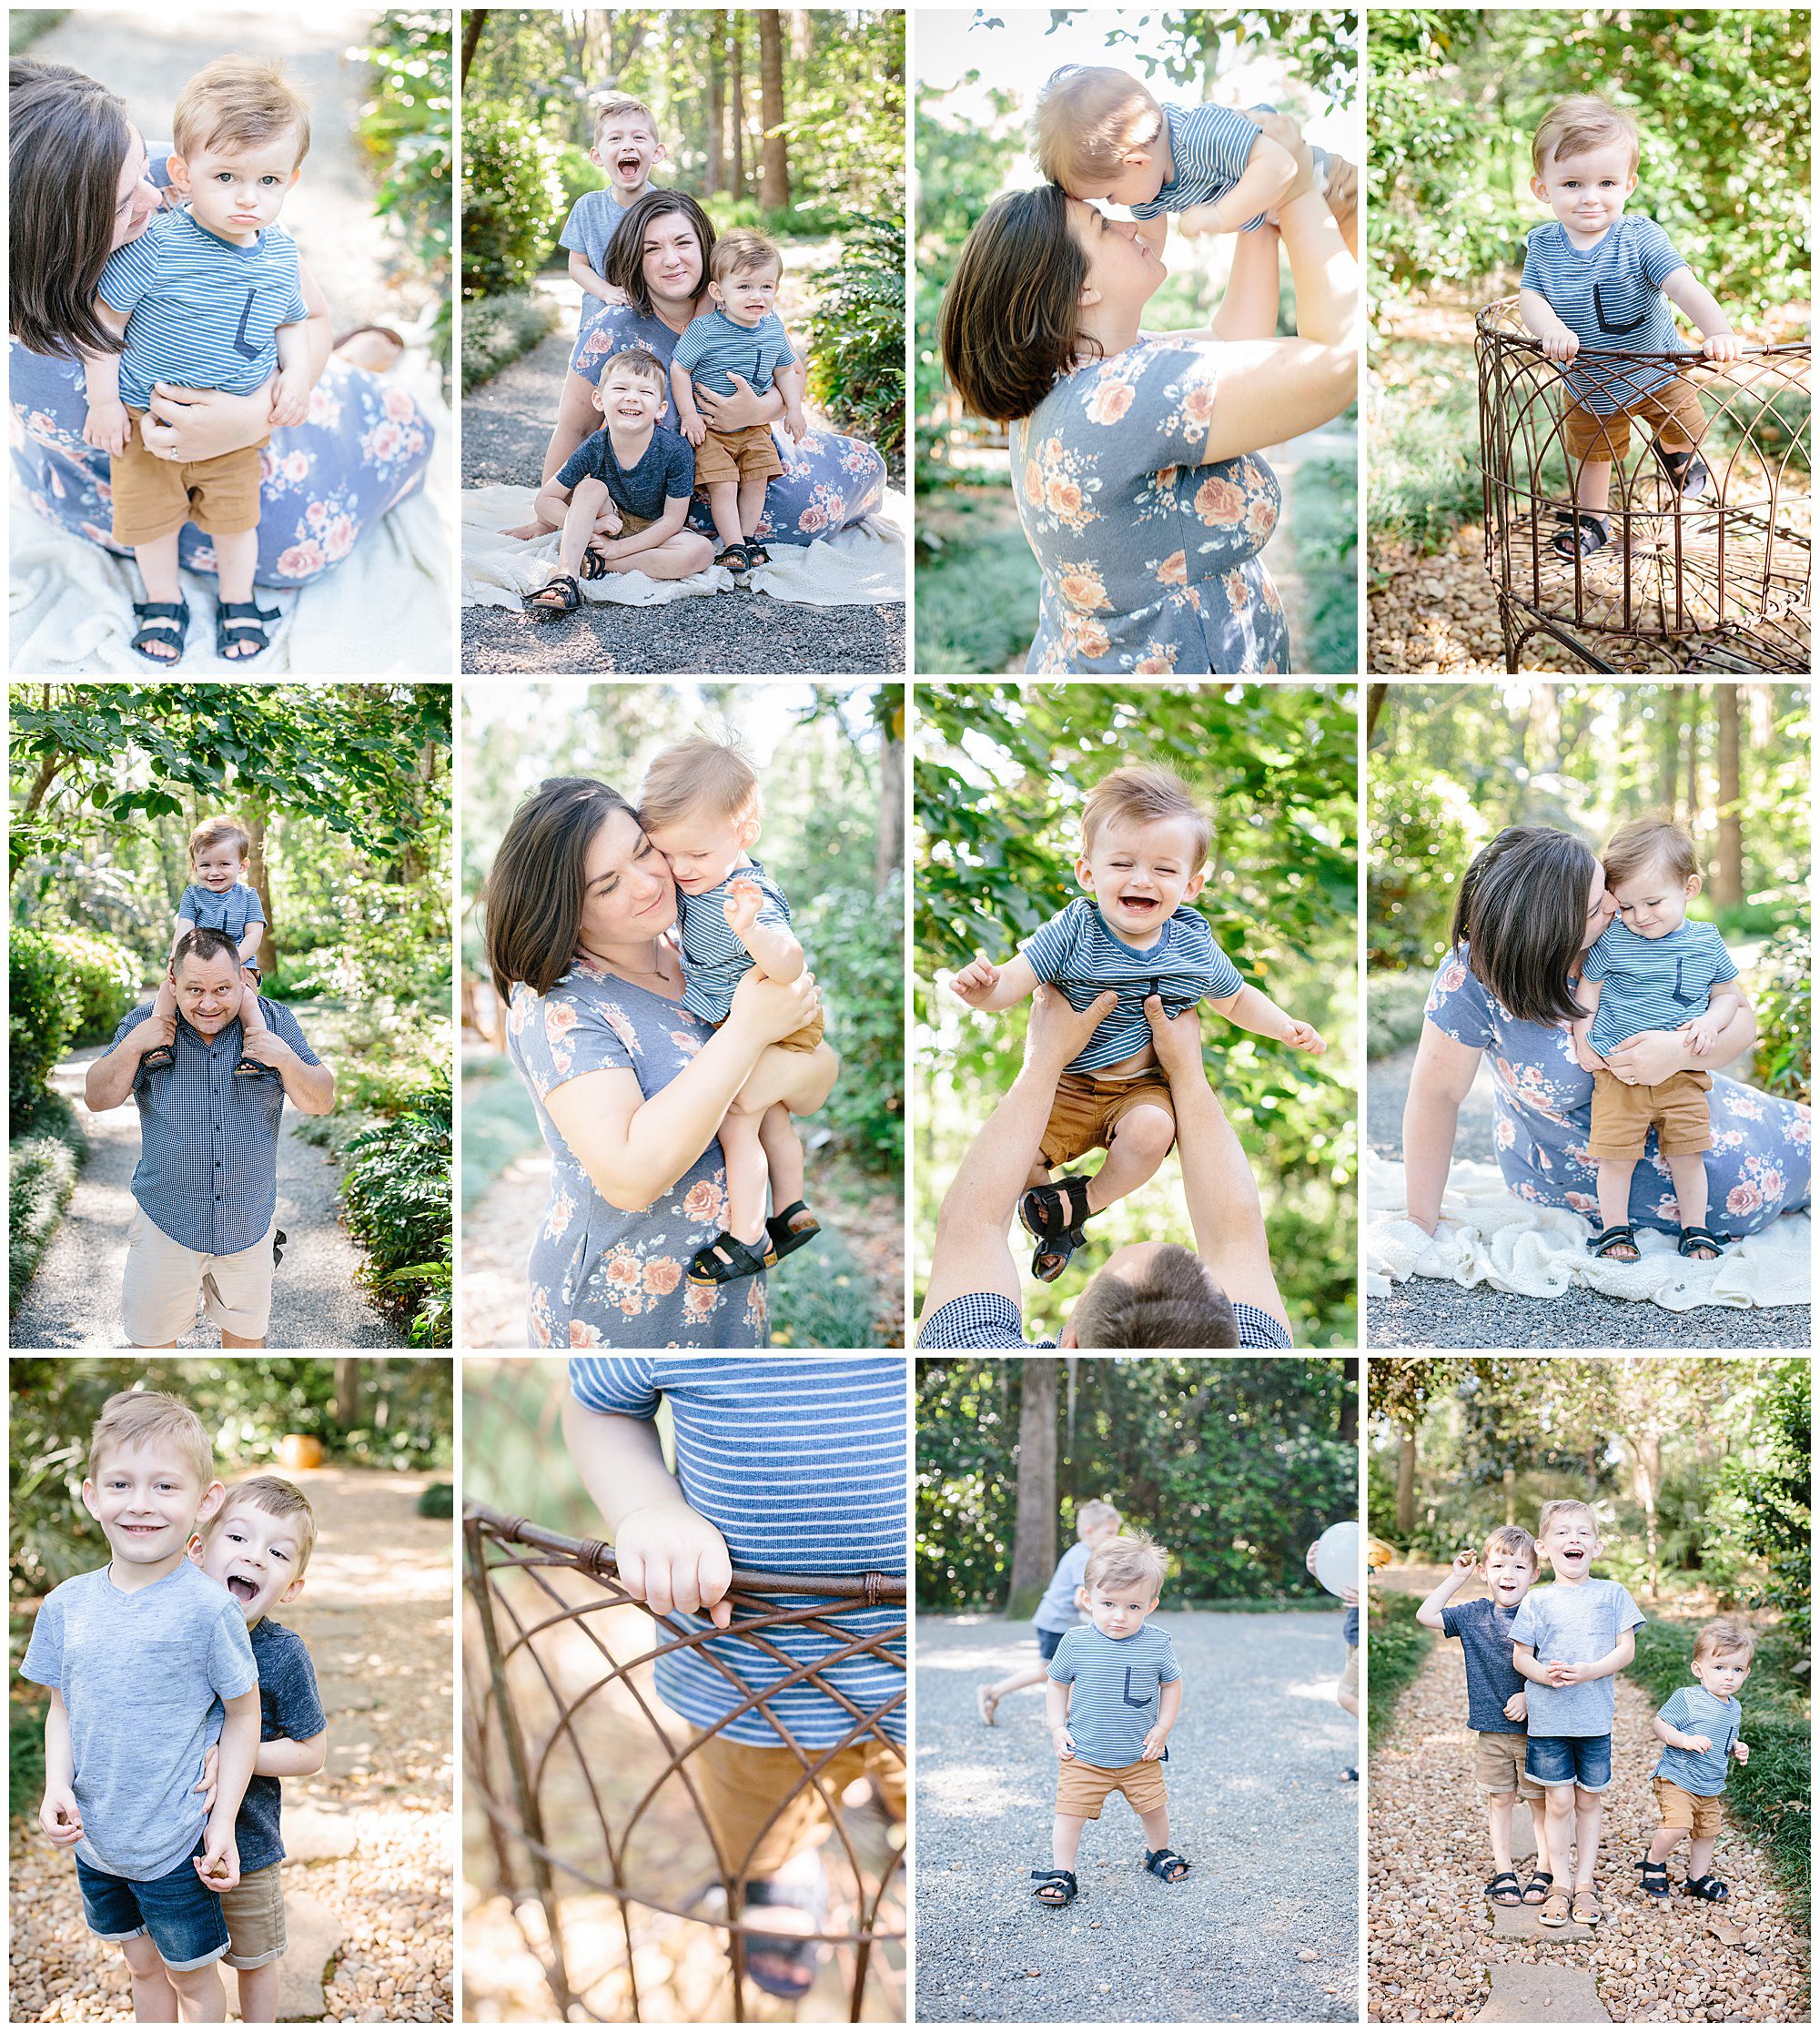 Jude 12 month session at Dorothy B. Oven Park, Sarah Gray Photography Tallahassee, Florida family, newborn, maternity, baby plan photographer